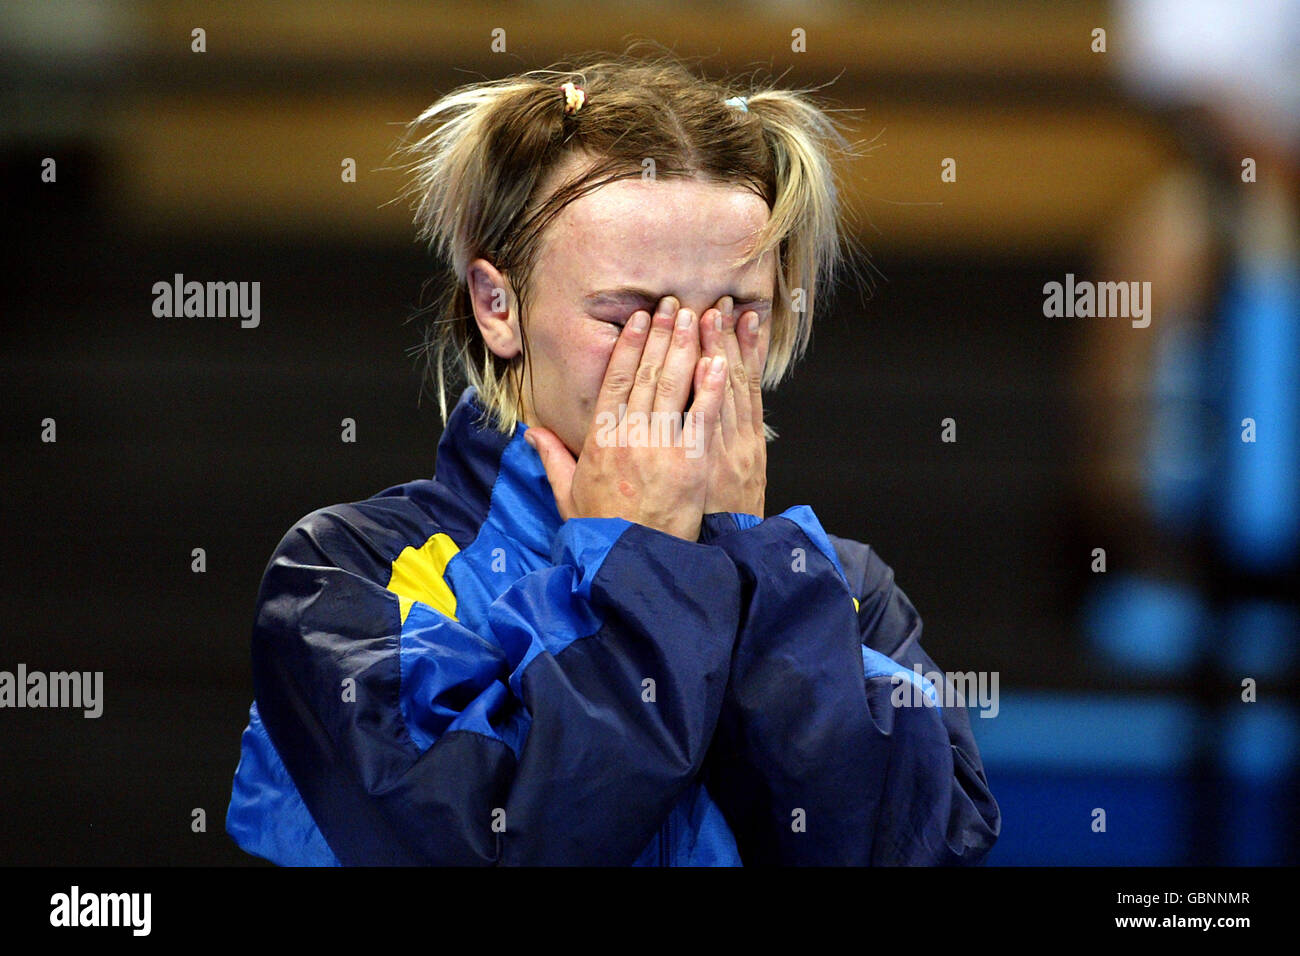 Wrestling - Athens Olympic Games 2004 - Women's 48kg - Final Stock Photo